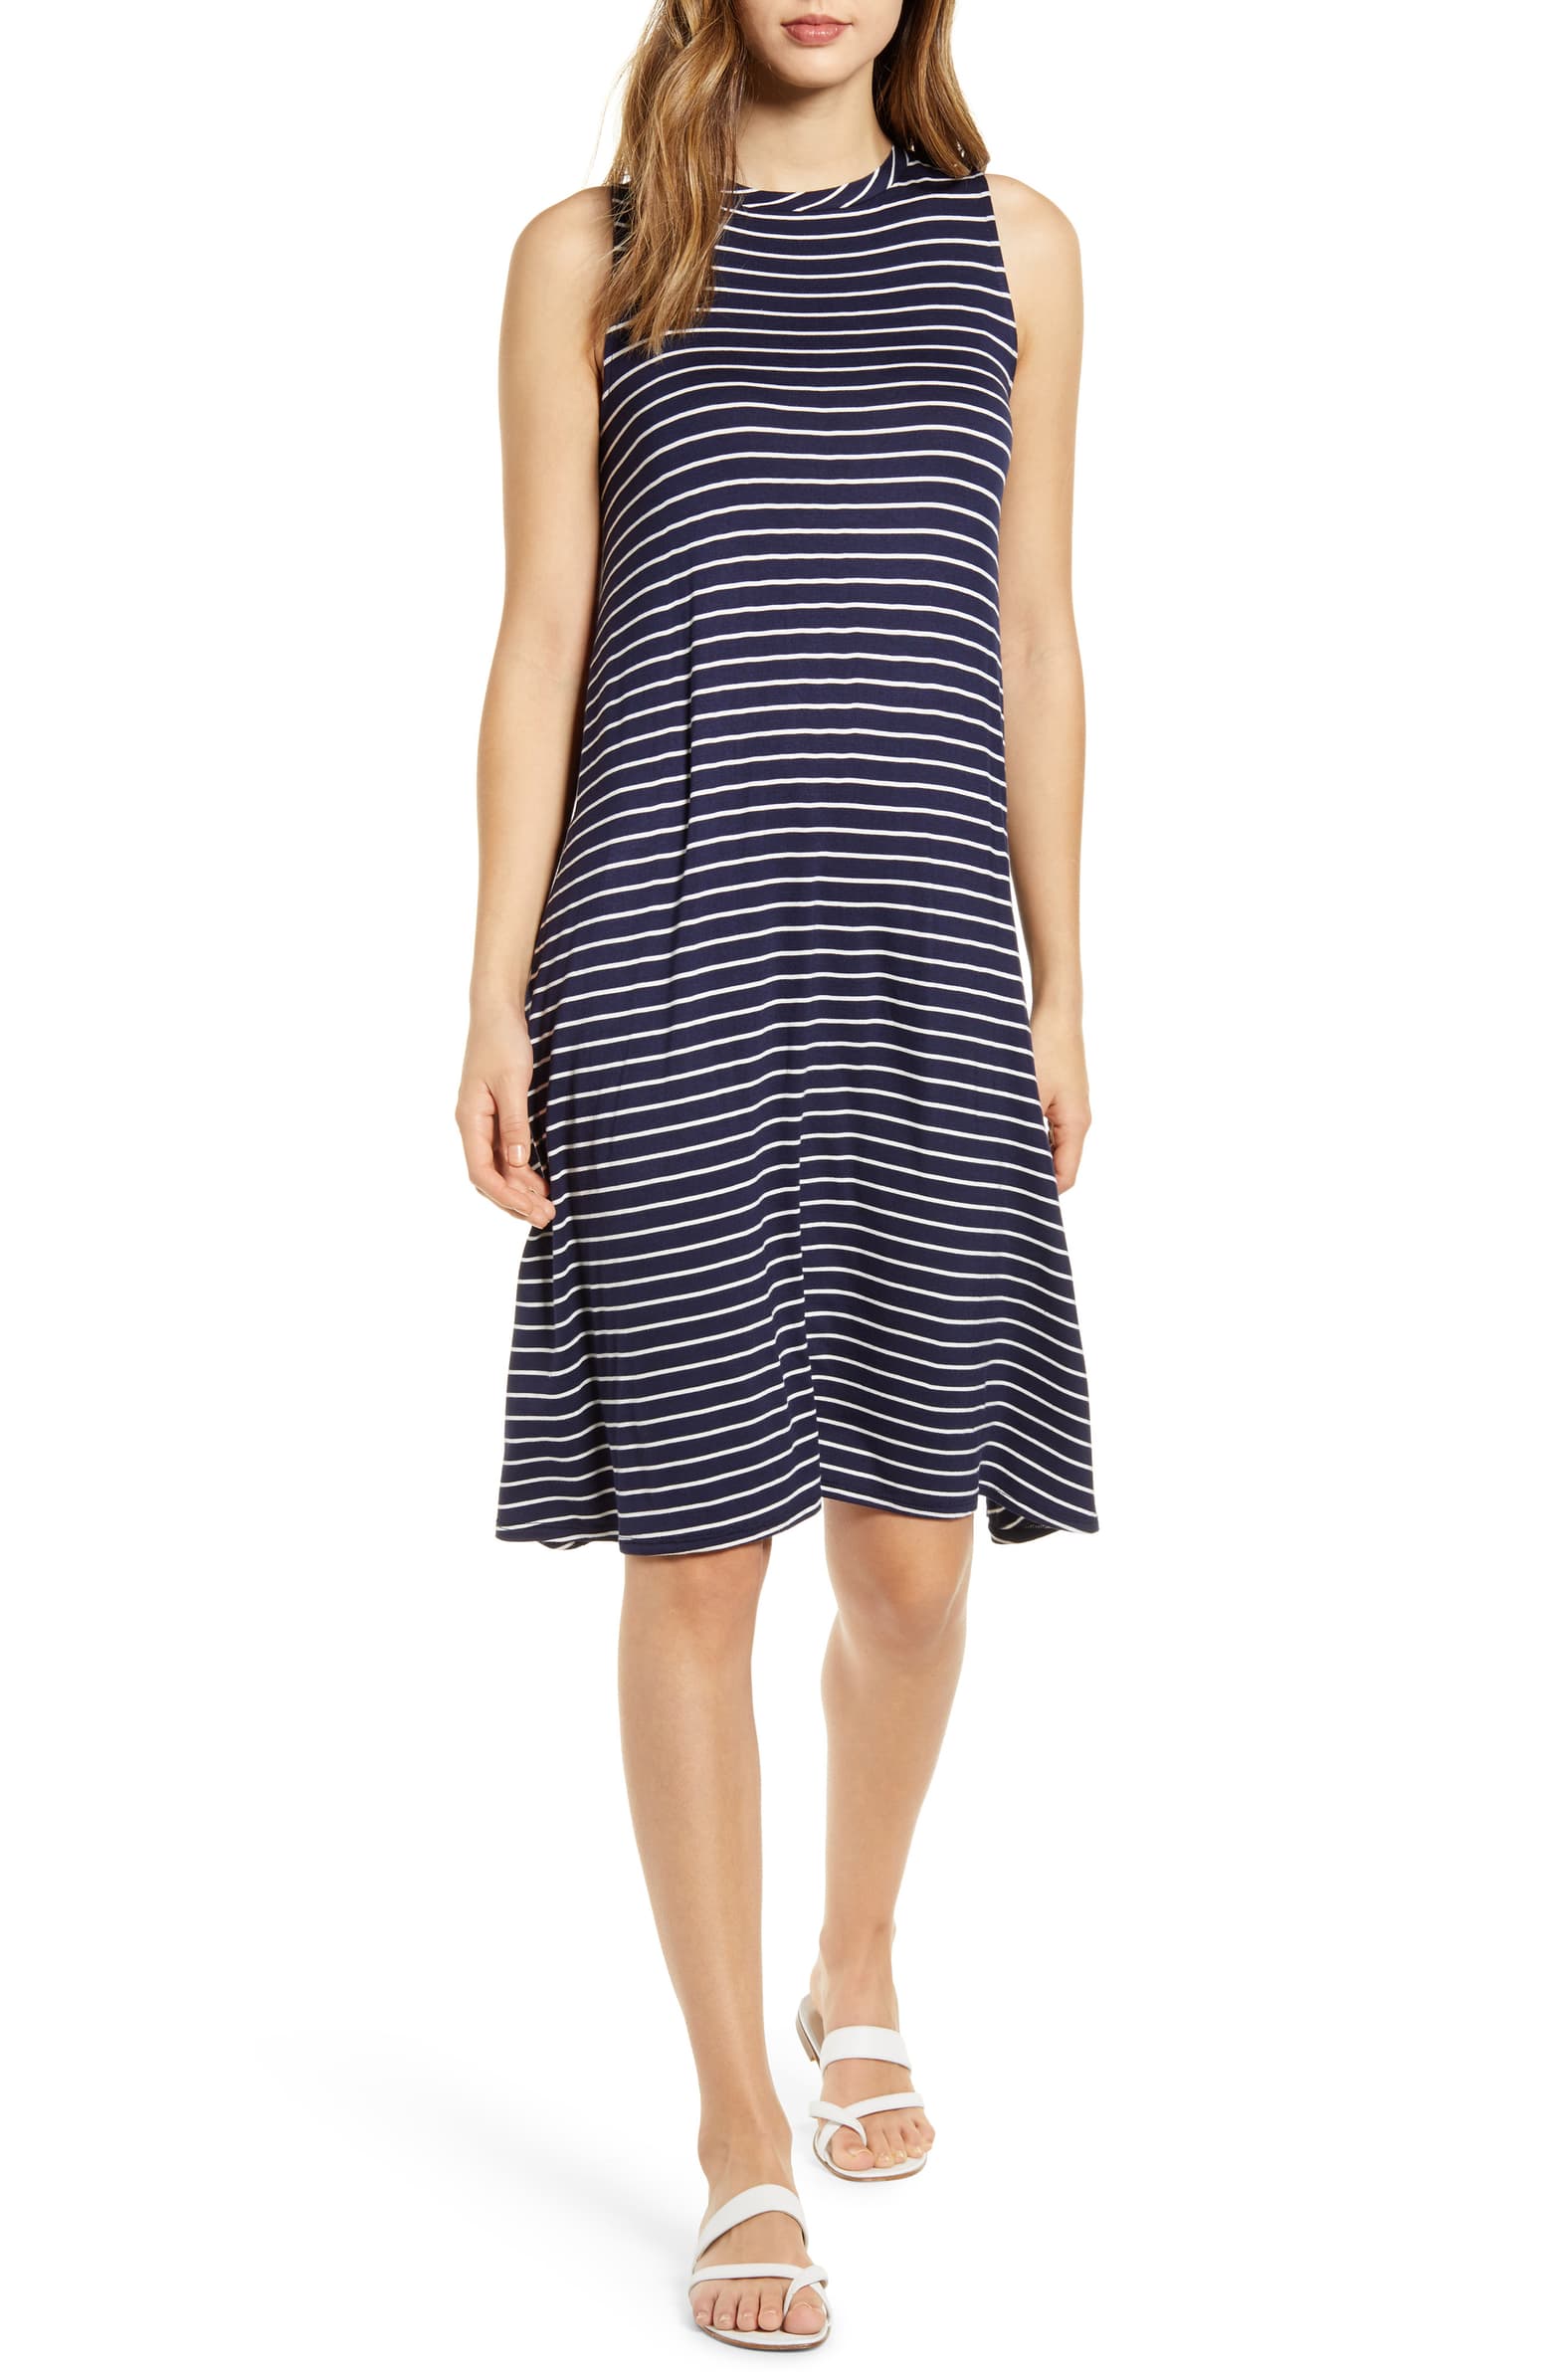 This $19 Dress Is Selling Fast At Nordstrom Because It Looks Good On ...